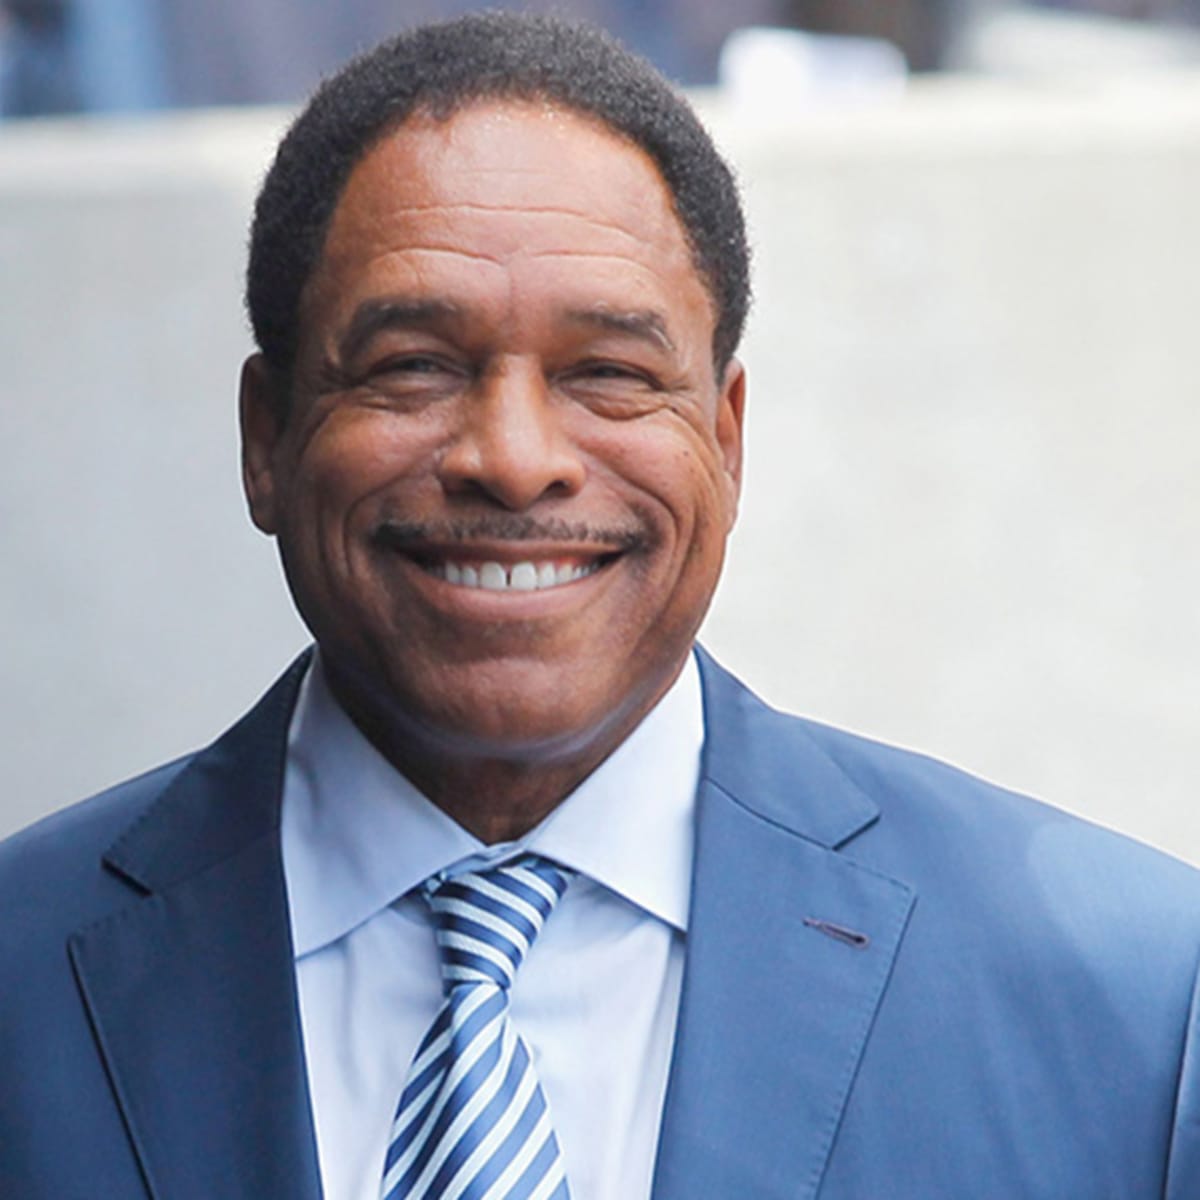 Dave Winfield on New York Yankees retiring his jersey - Sports